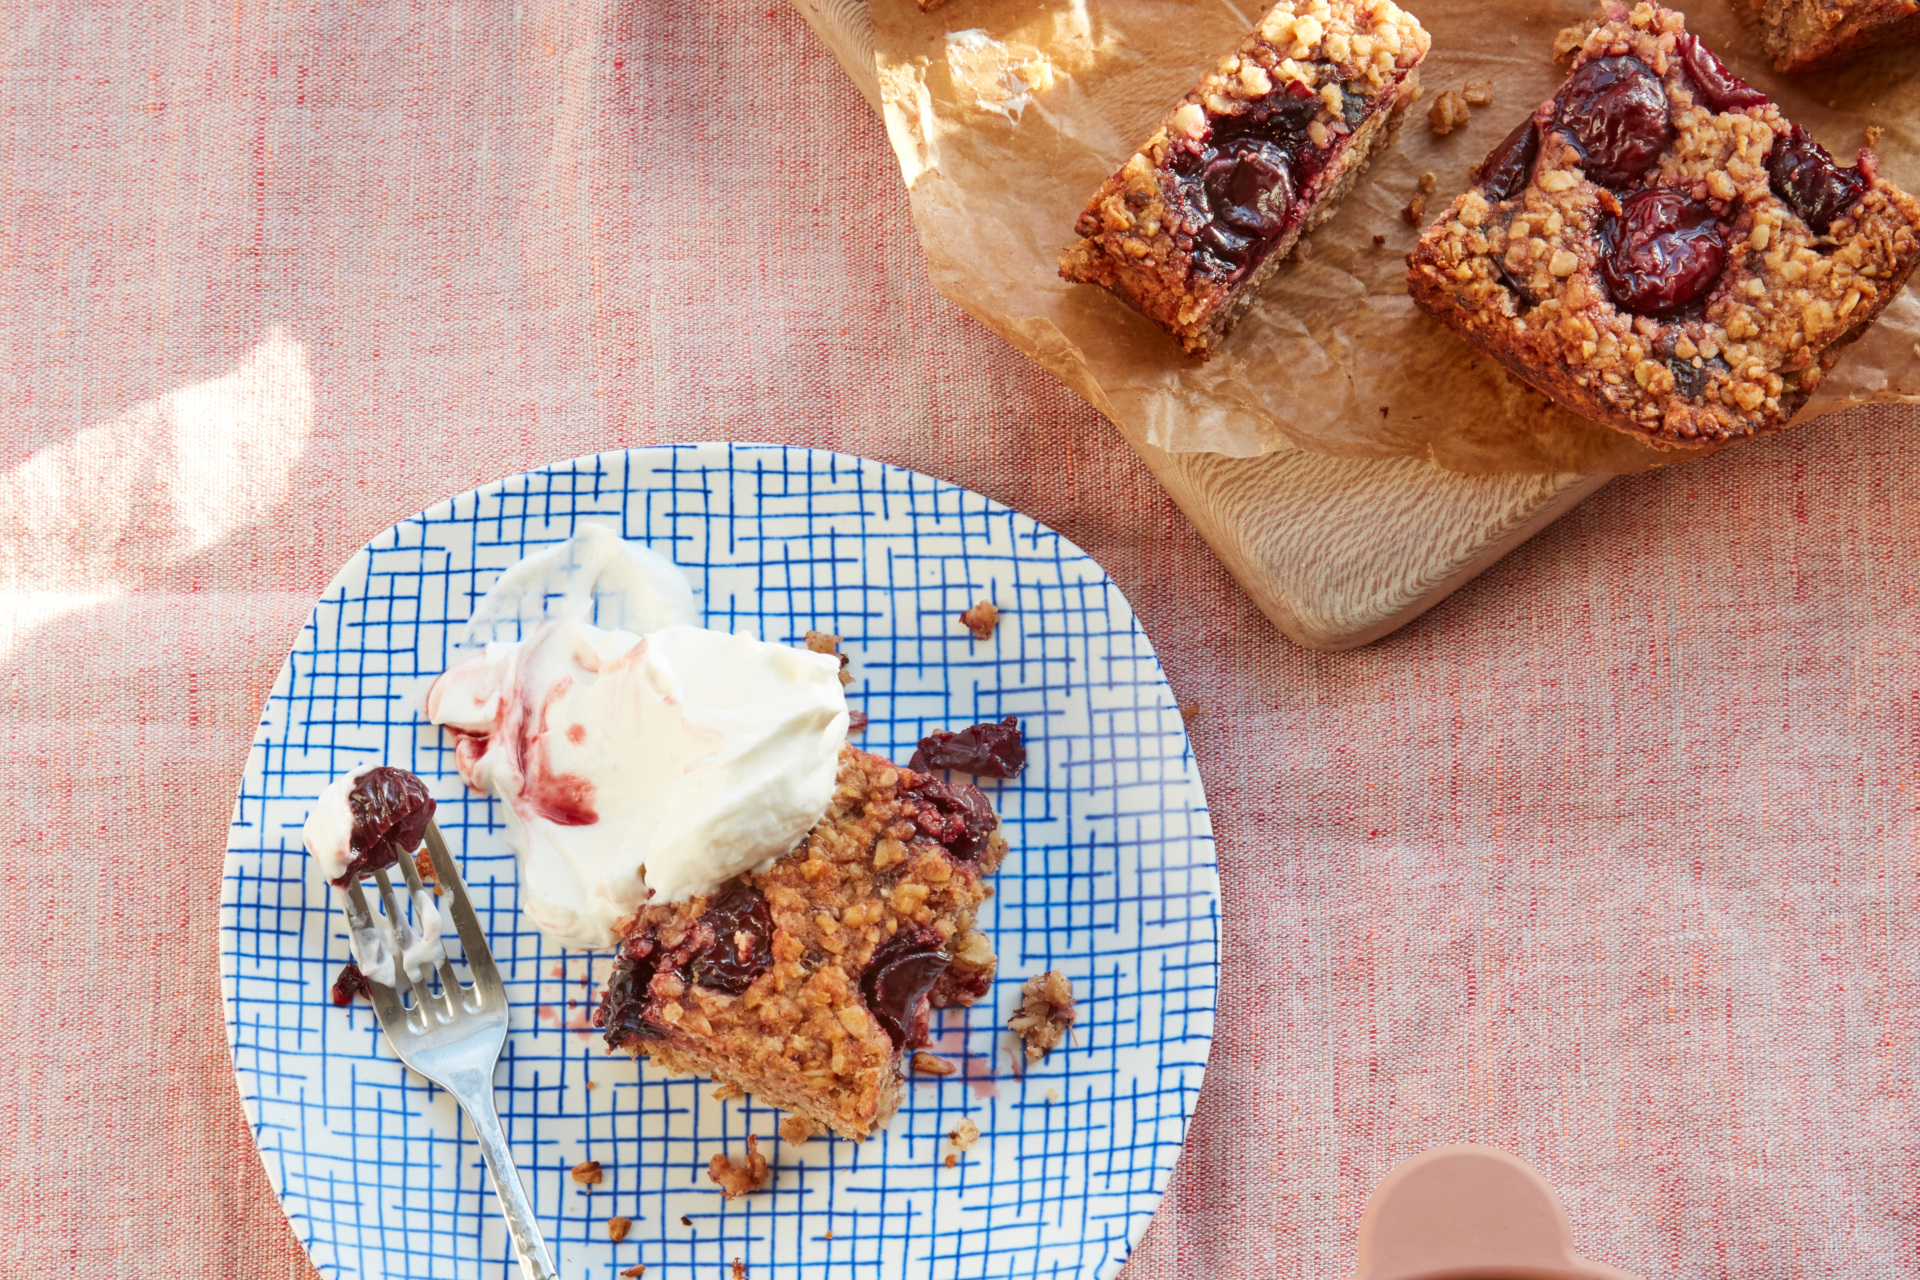 Cherry bakewell flapjacks served with ice cream on a blue plate